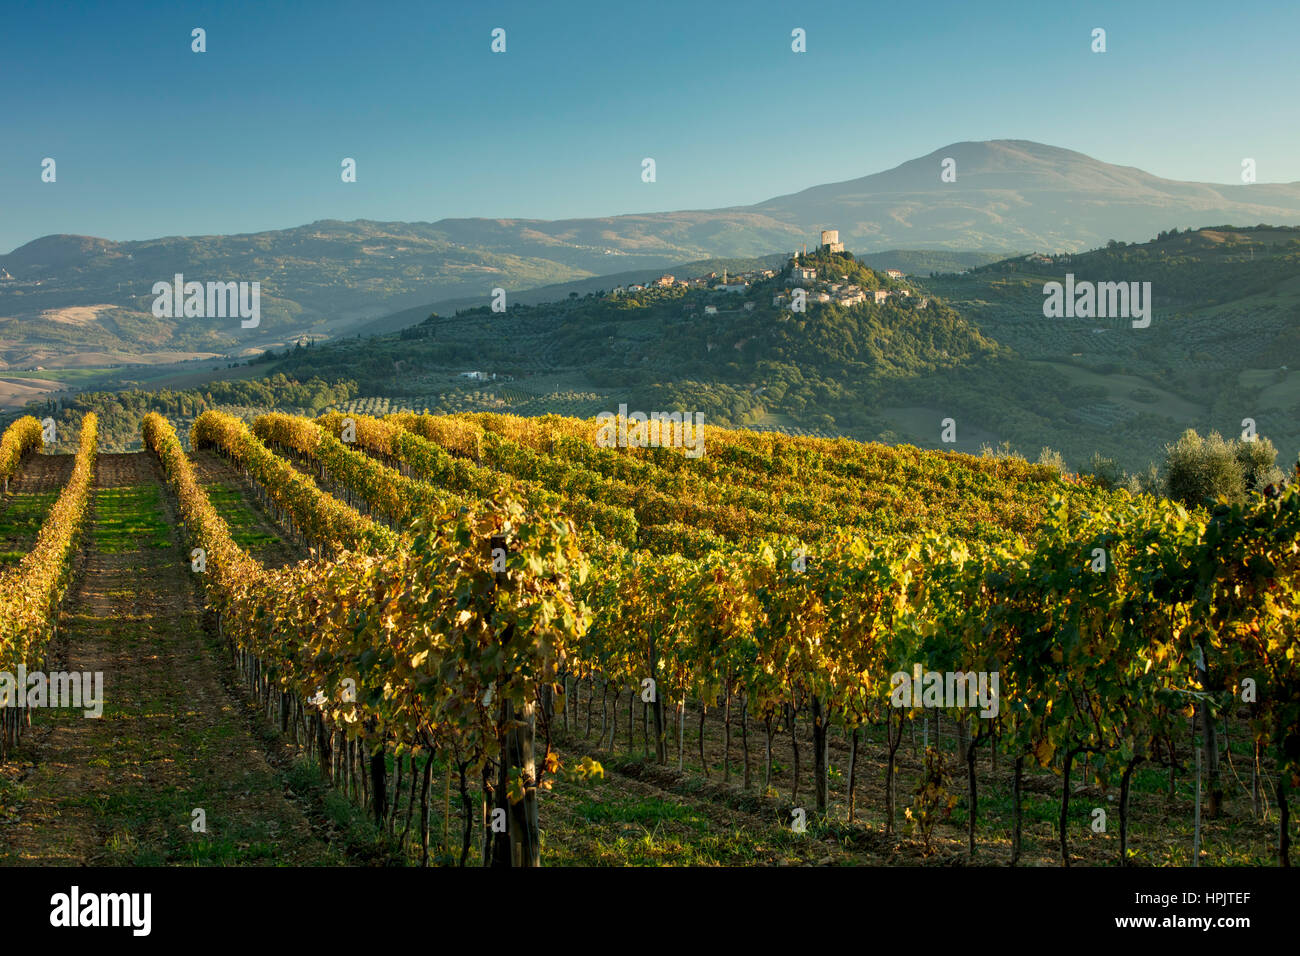 Evening view over vineyards to Rocca d'Orcia, Tuscany, Italy Stock Photo